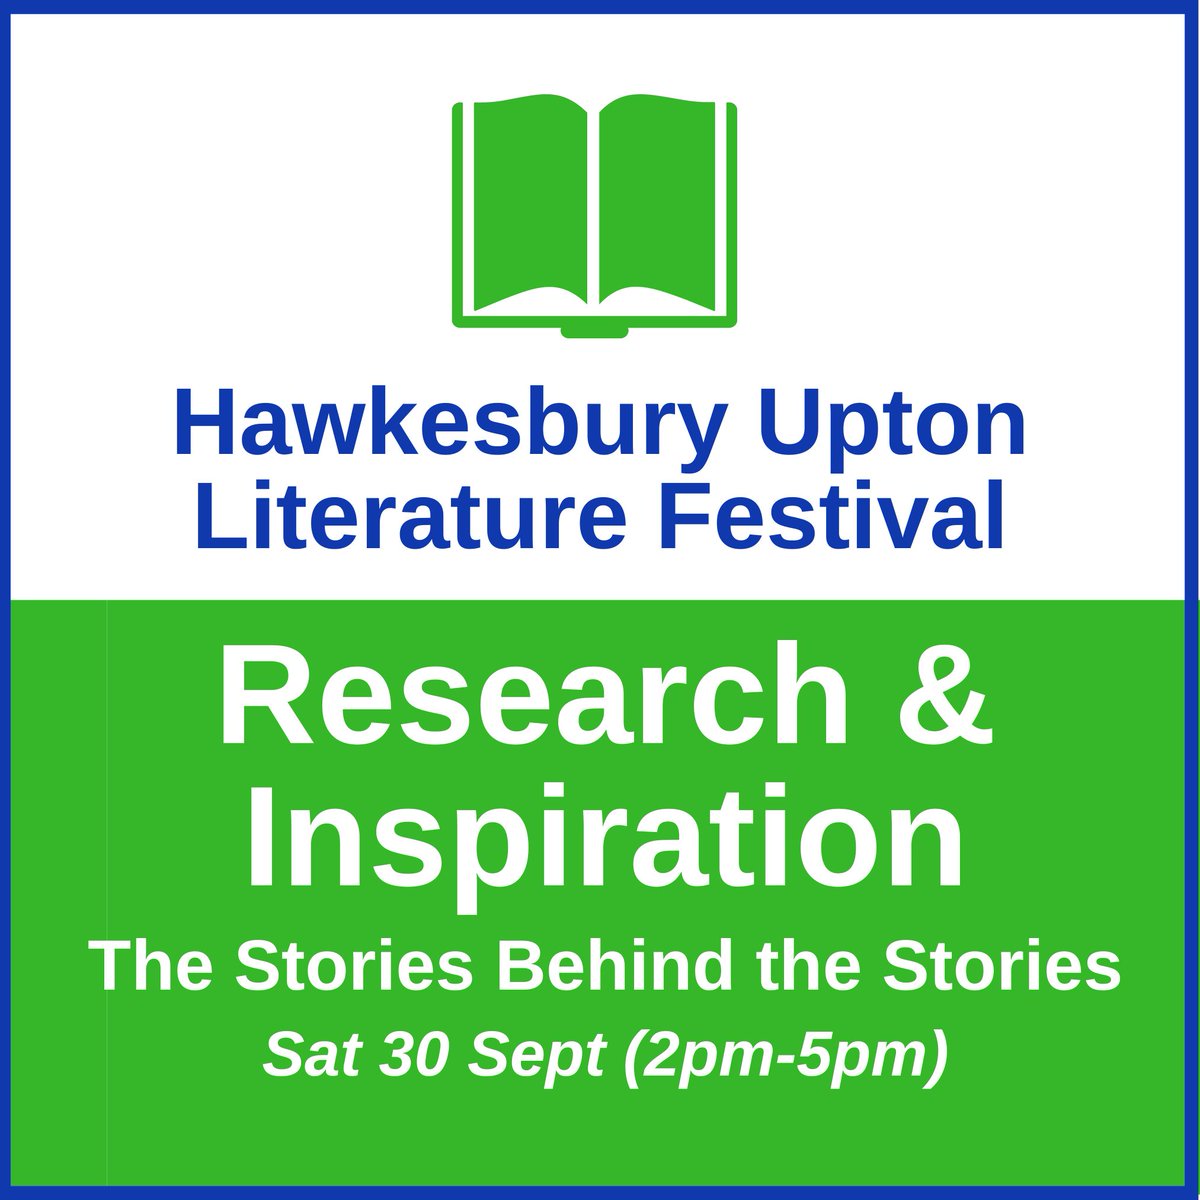 Ever wondered where #writers get their ideas? Find out at the next #HULFTalk in beautiful #HawkesburyUpton featuring 8 authors: @LucienneWrite, @Heatherika1, @AliBacon, @DebbieYoungBN, Mari Howard, Jean Burnett, Justin Newland & H J Reed! Box office: eventbrite.co.uk/e/hulf-talk-re…